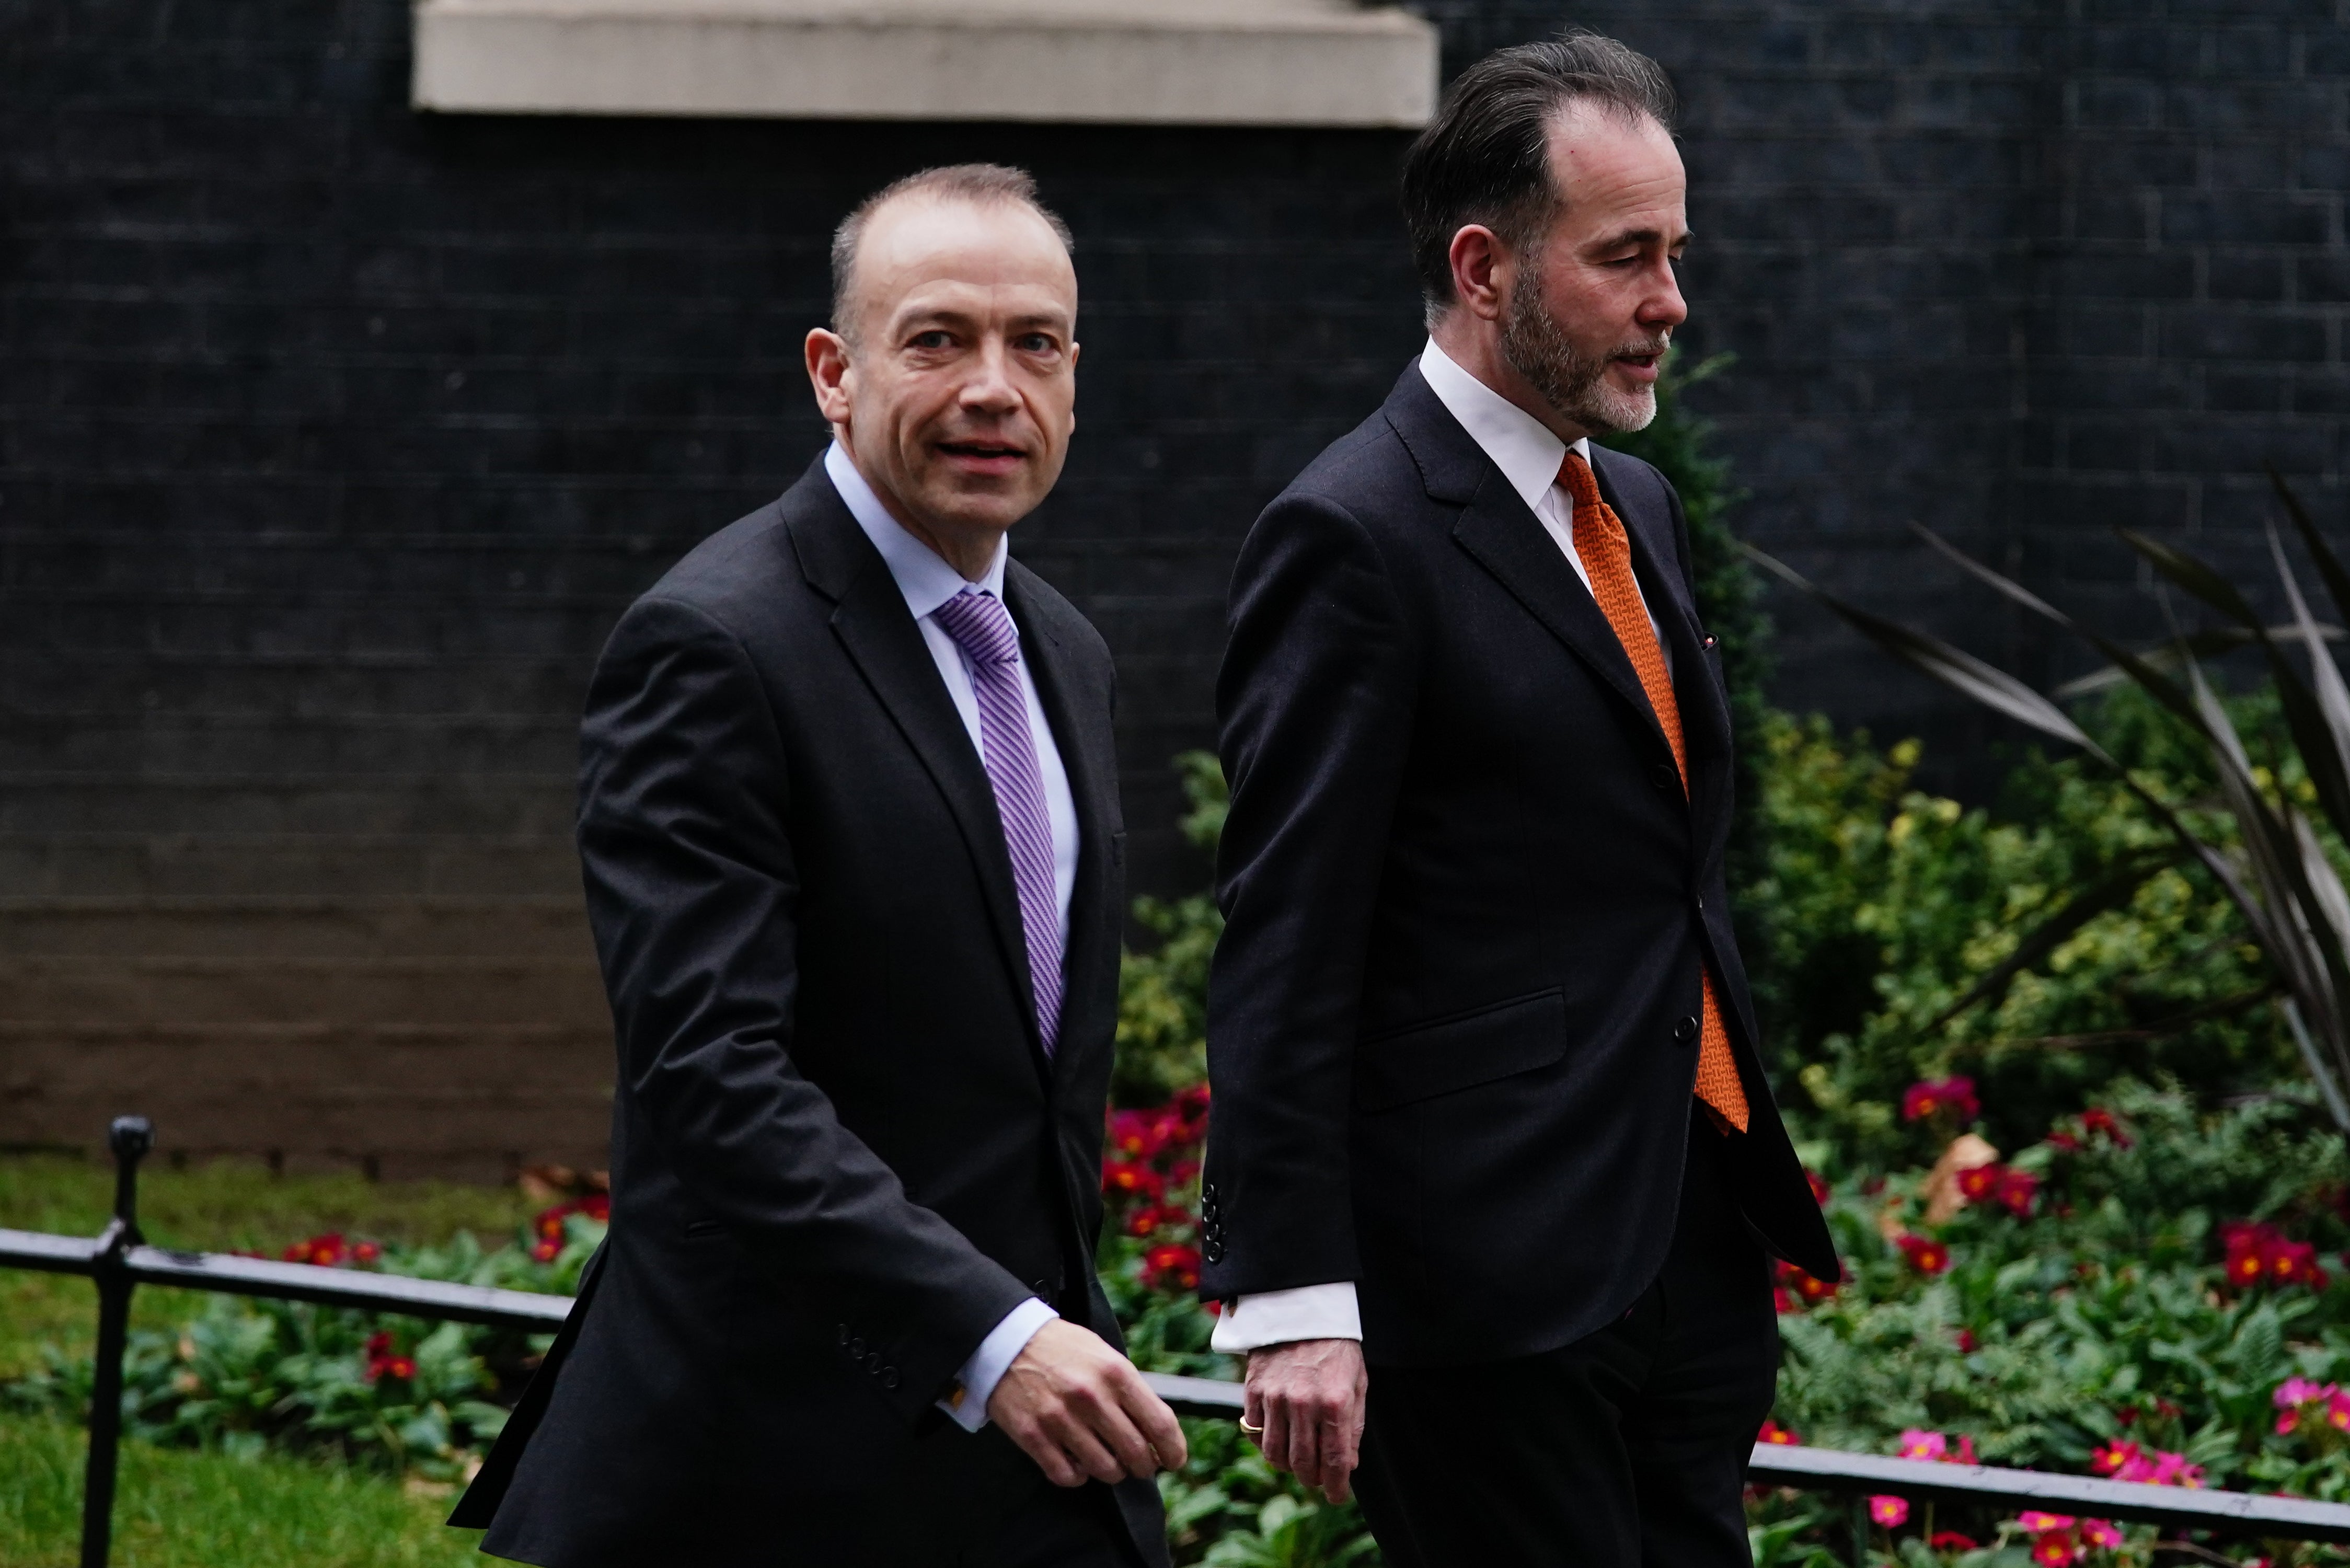 Chris Pincher (right) leaves Downing Street with chief whip Chris Heaton-Harris following their appointment in February (Aaron Chown/PA)